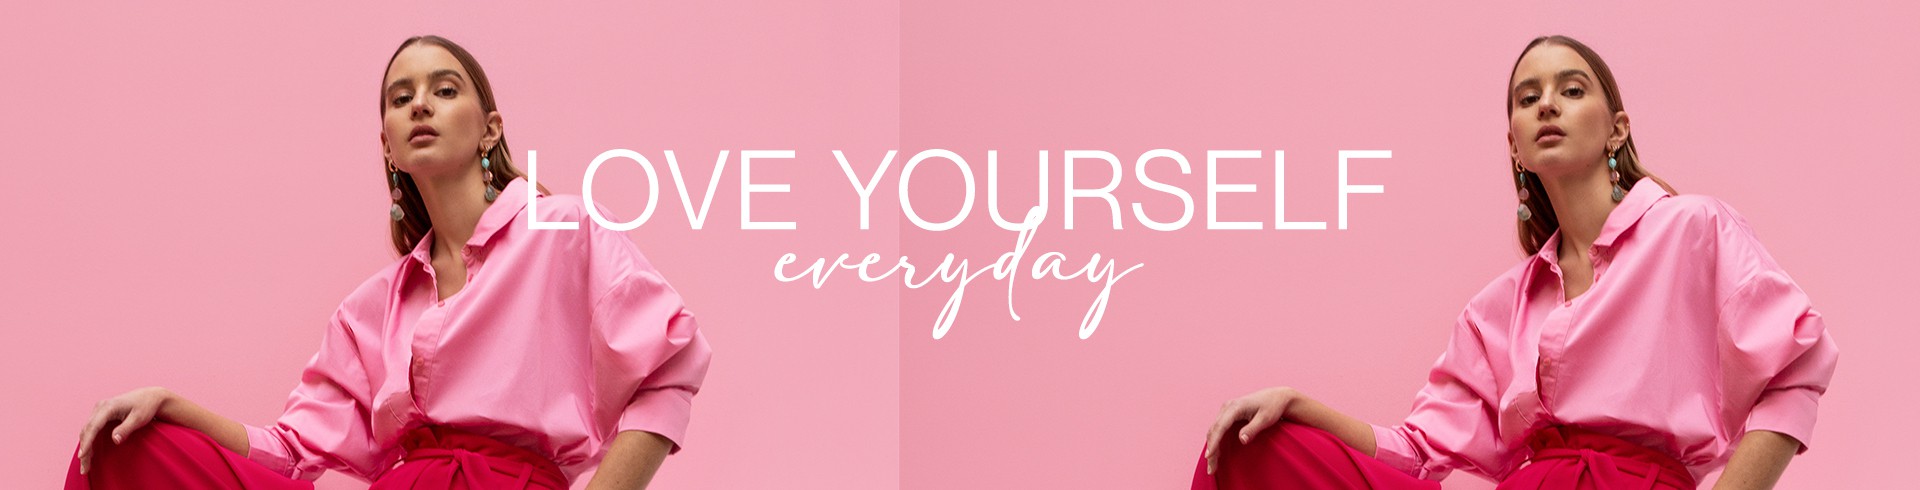 Love your self every day!